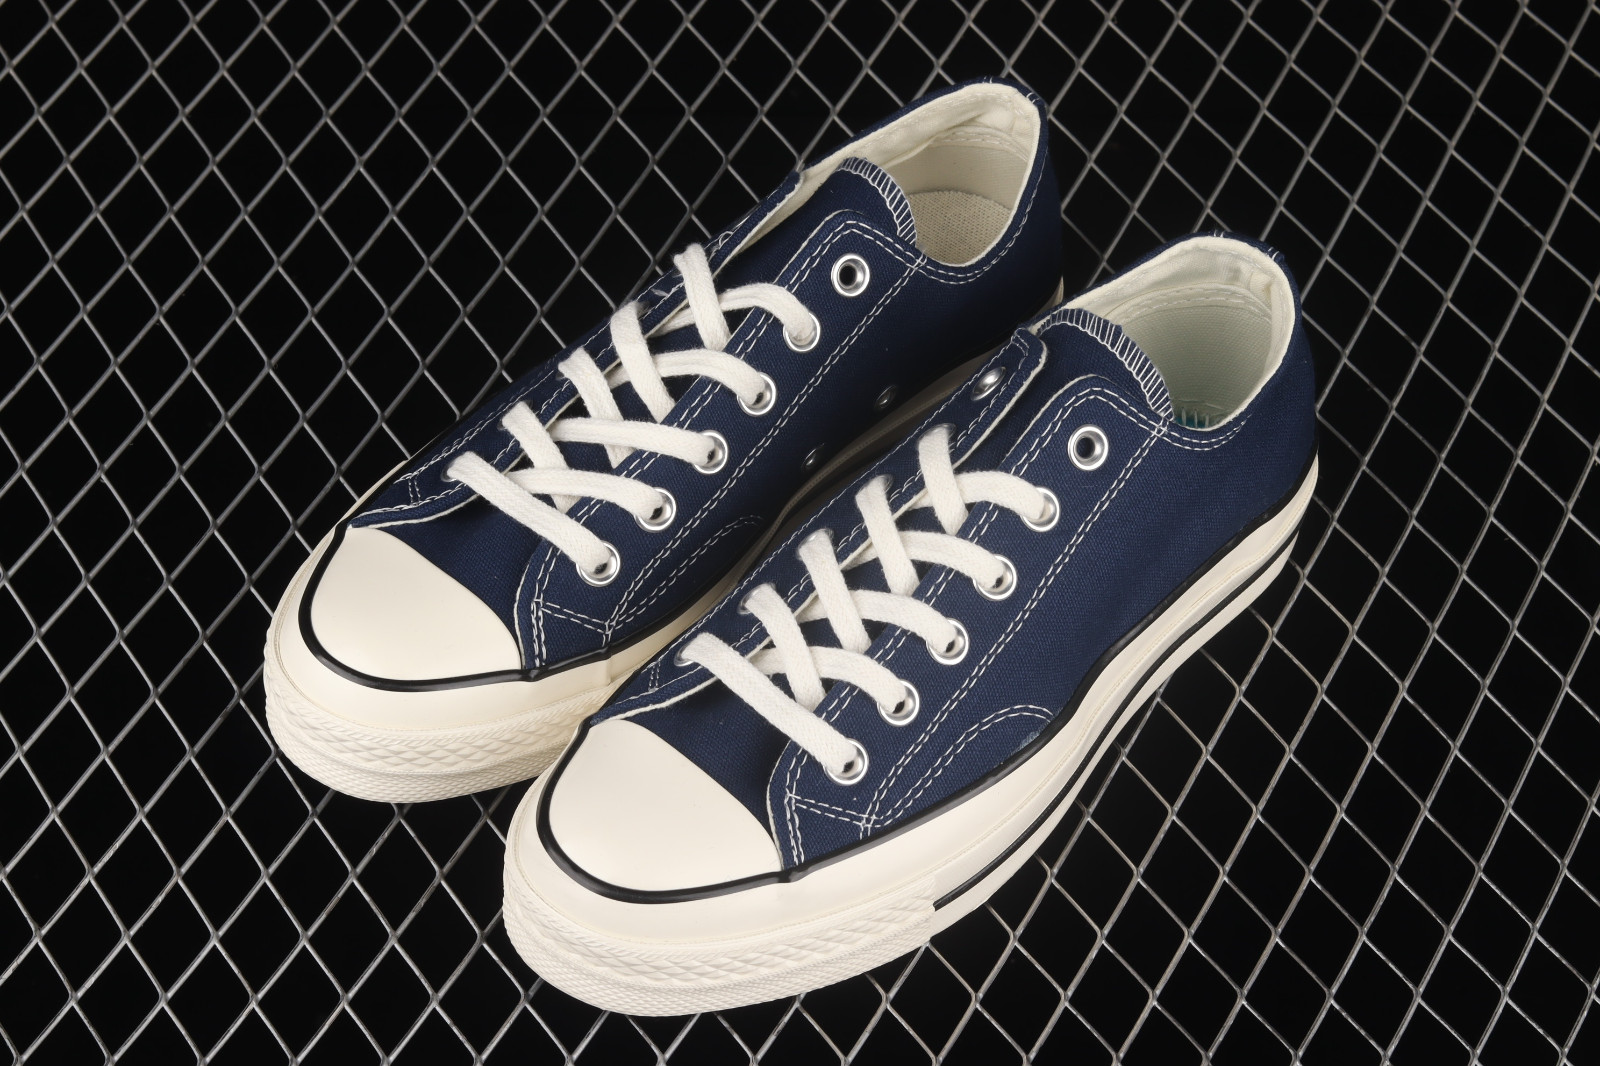 Converse Chuck Taylor All Star 70 Low Navy Blue Black 172679C - RvceShops